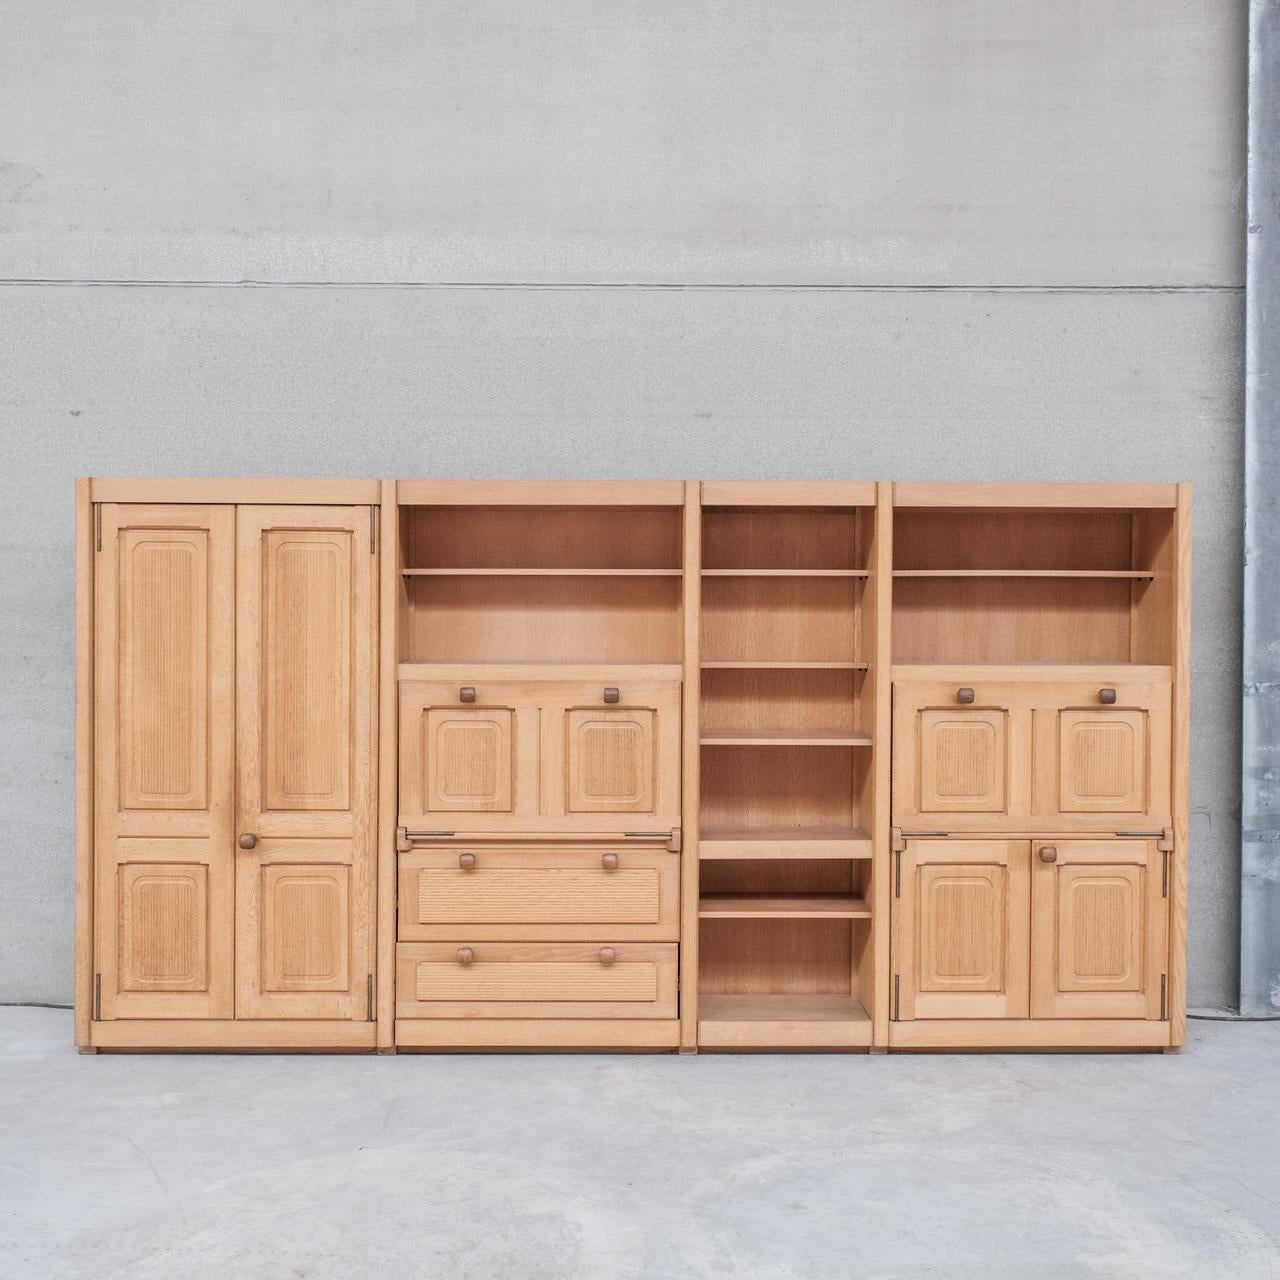 A substantial multi use oak cabinet and shelving unit by esteemed French designers Guillerme et Chambron. 

France, c1960s. 

A multi-faceted unit, with two large doors to the left, hiding shelving, drawers and a drop down cupboard to the